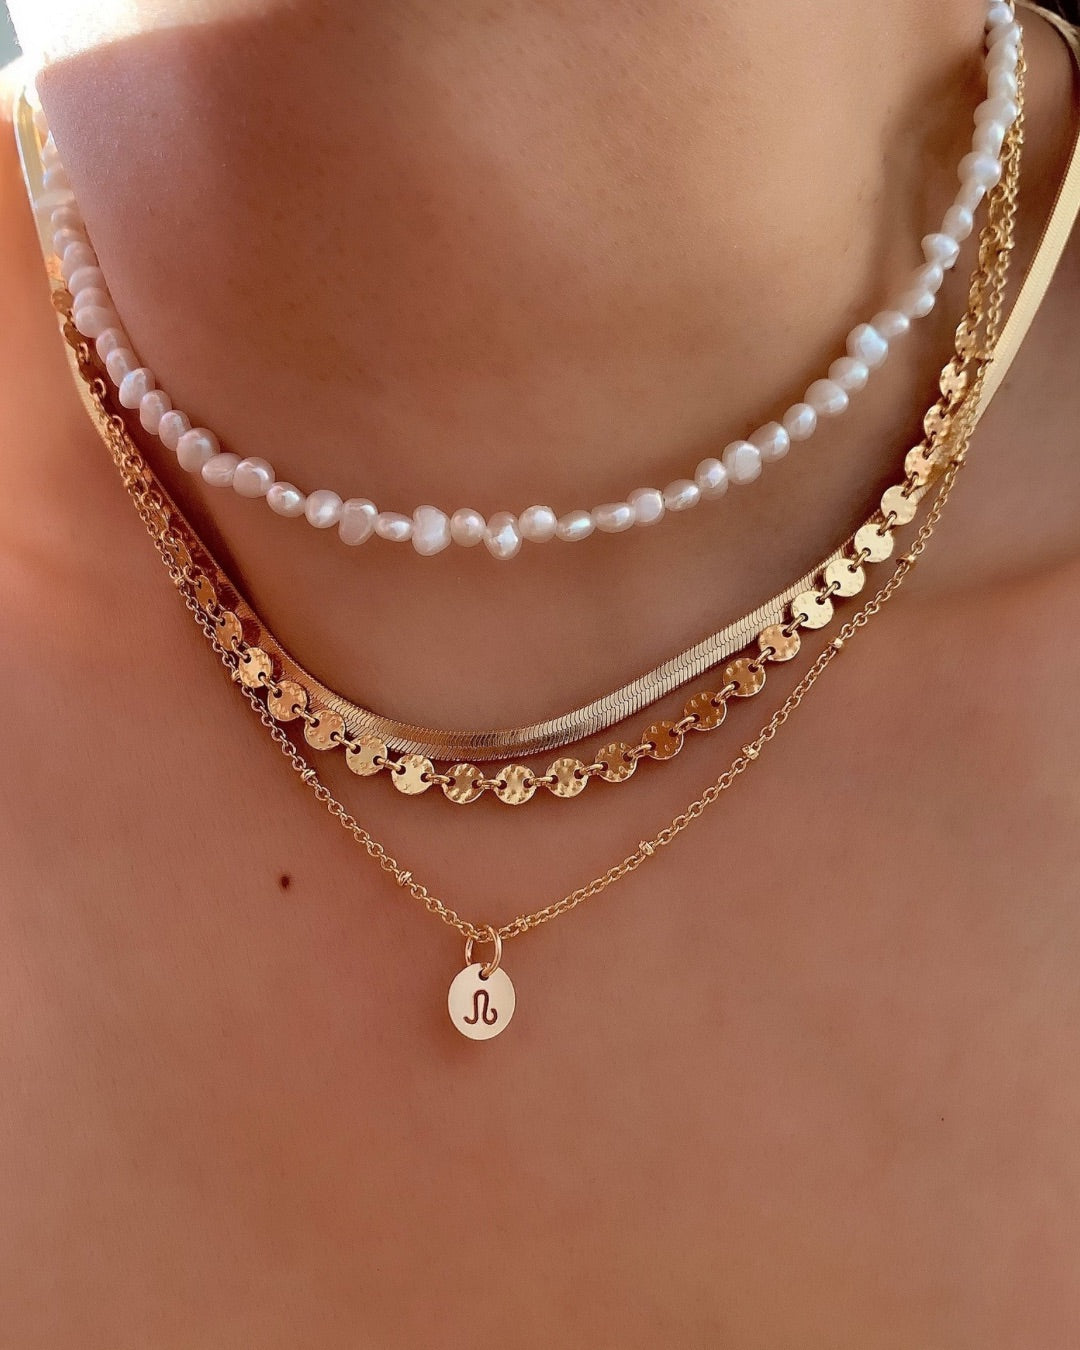 Yellow gold fill necklace chain paired with mini zodiac pendant. Layered with the snake chain necklace, pearl choker and molten coin necklace. 